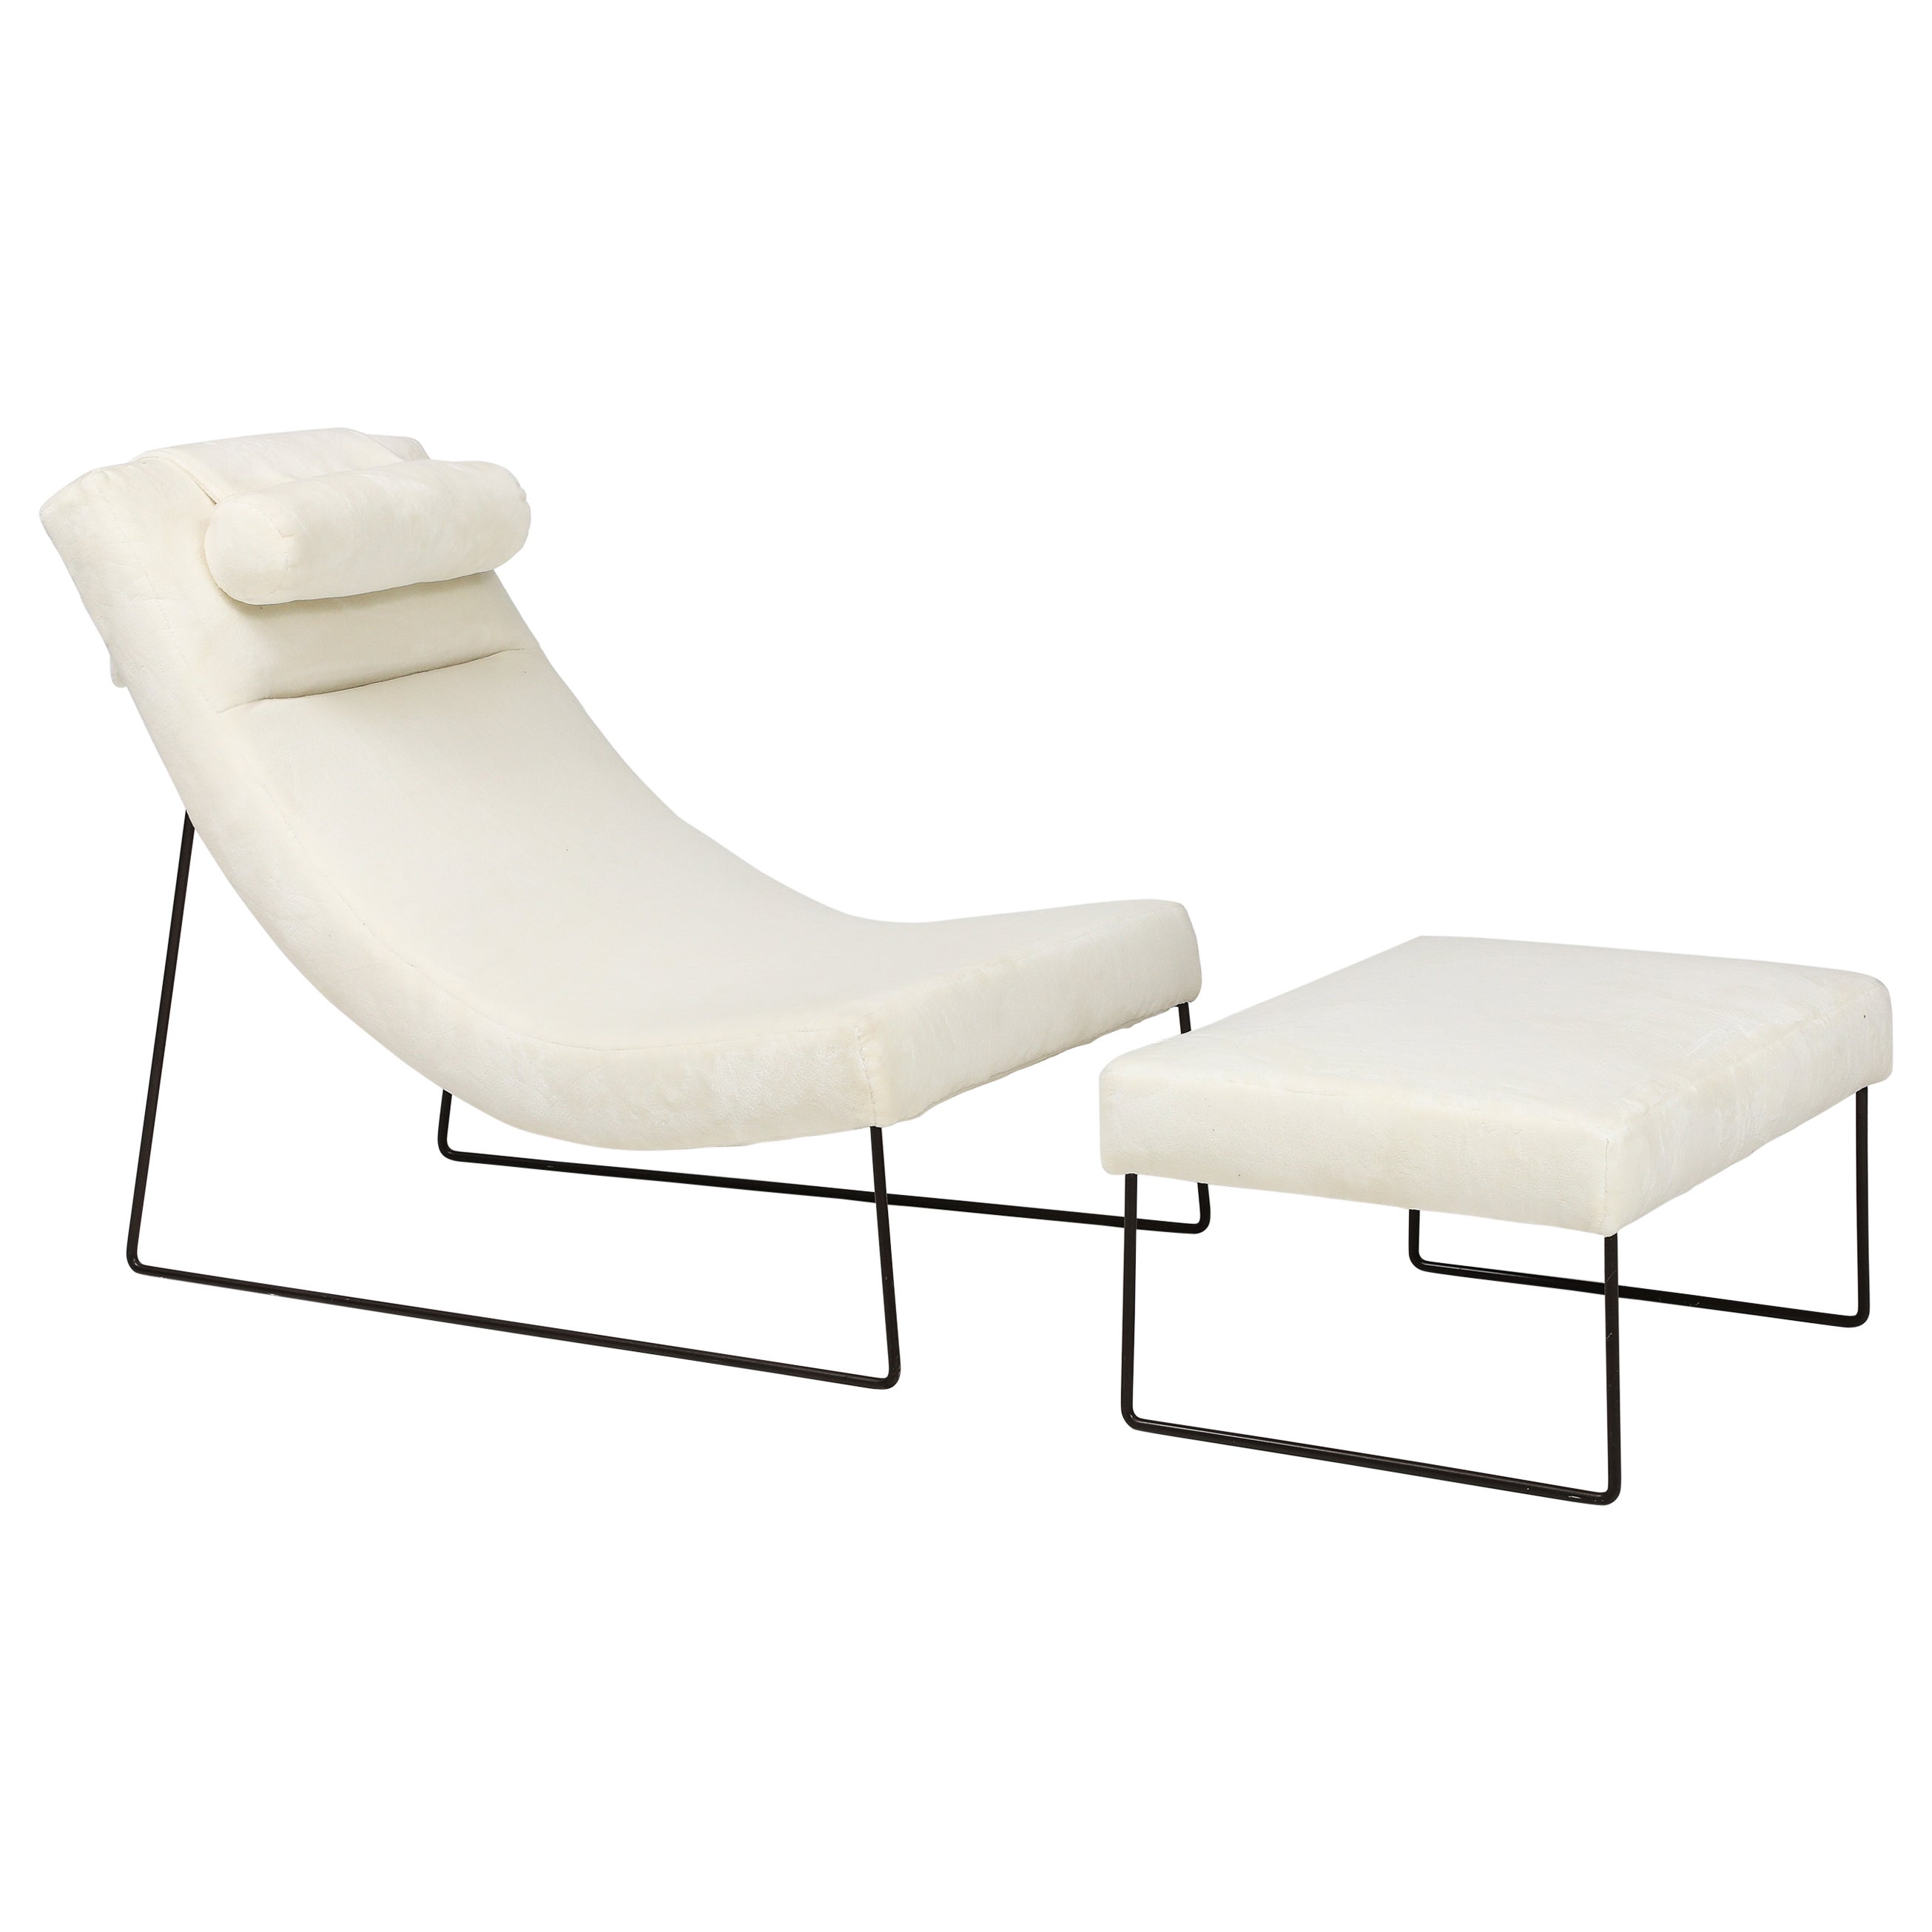 Italian Modernist Wrought Iron Chaise and Ottoman, Italy, circa 1960 